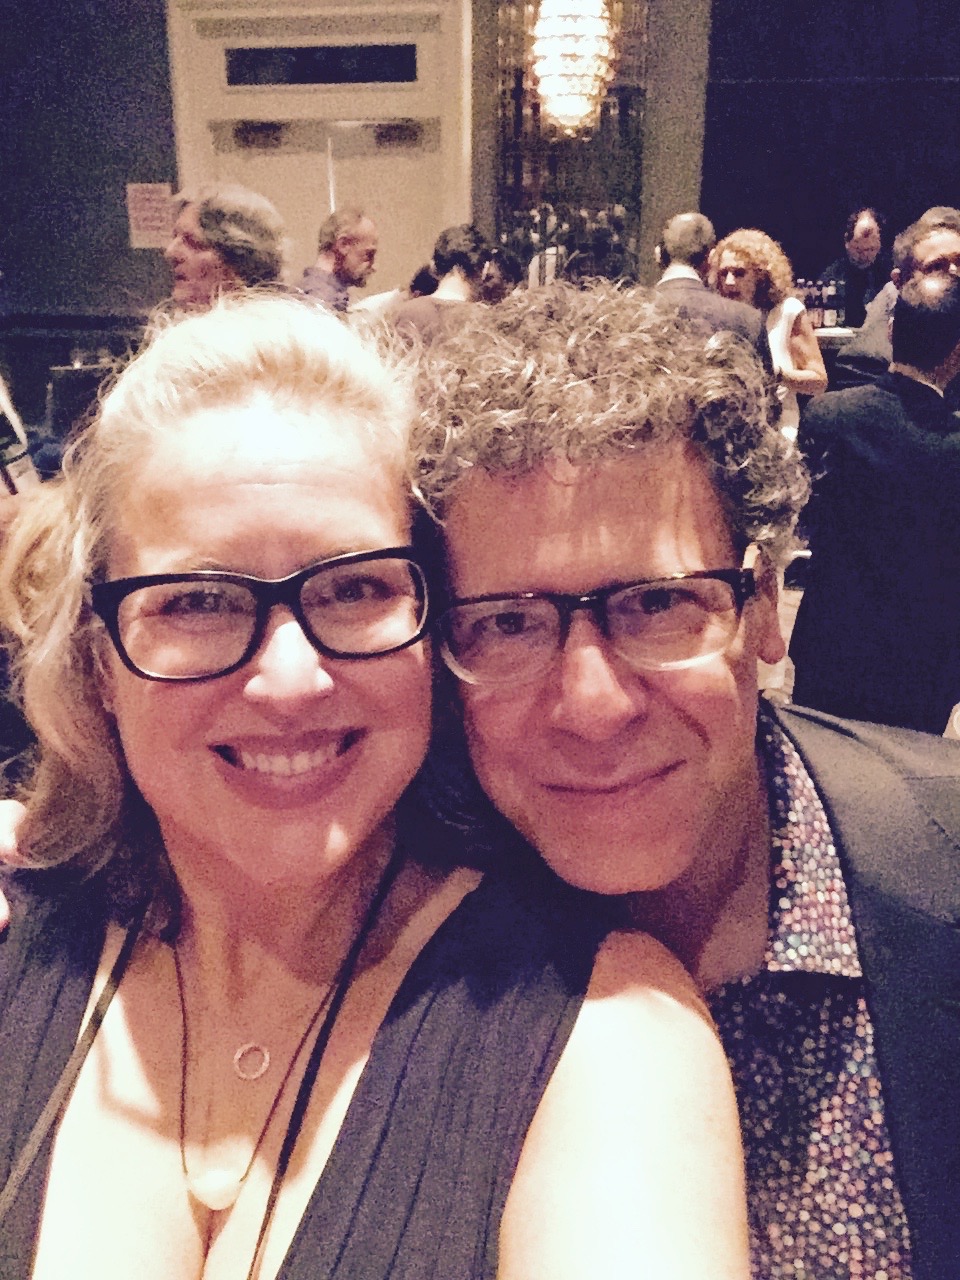  I was lucky enough to chat with SEAN in New York last week at Thrillerfest!